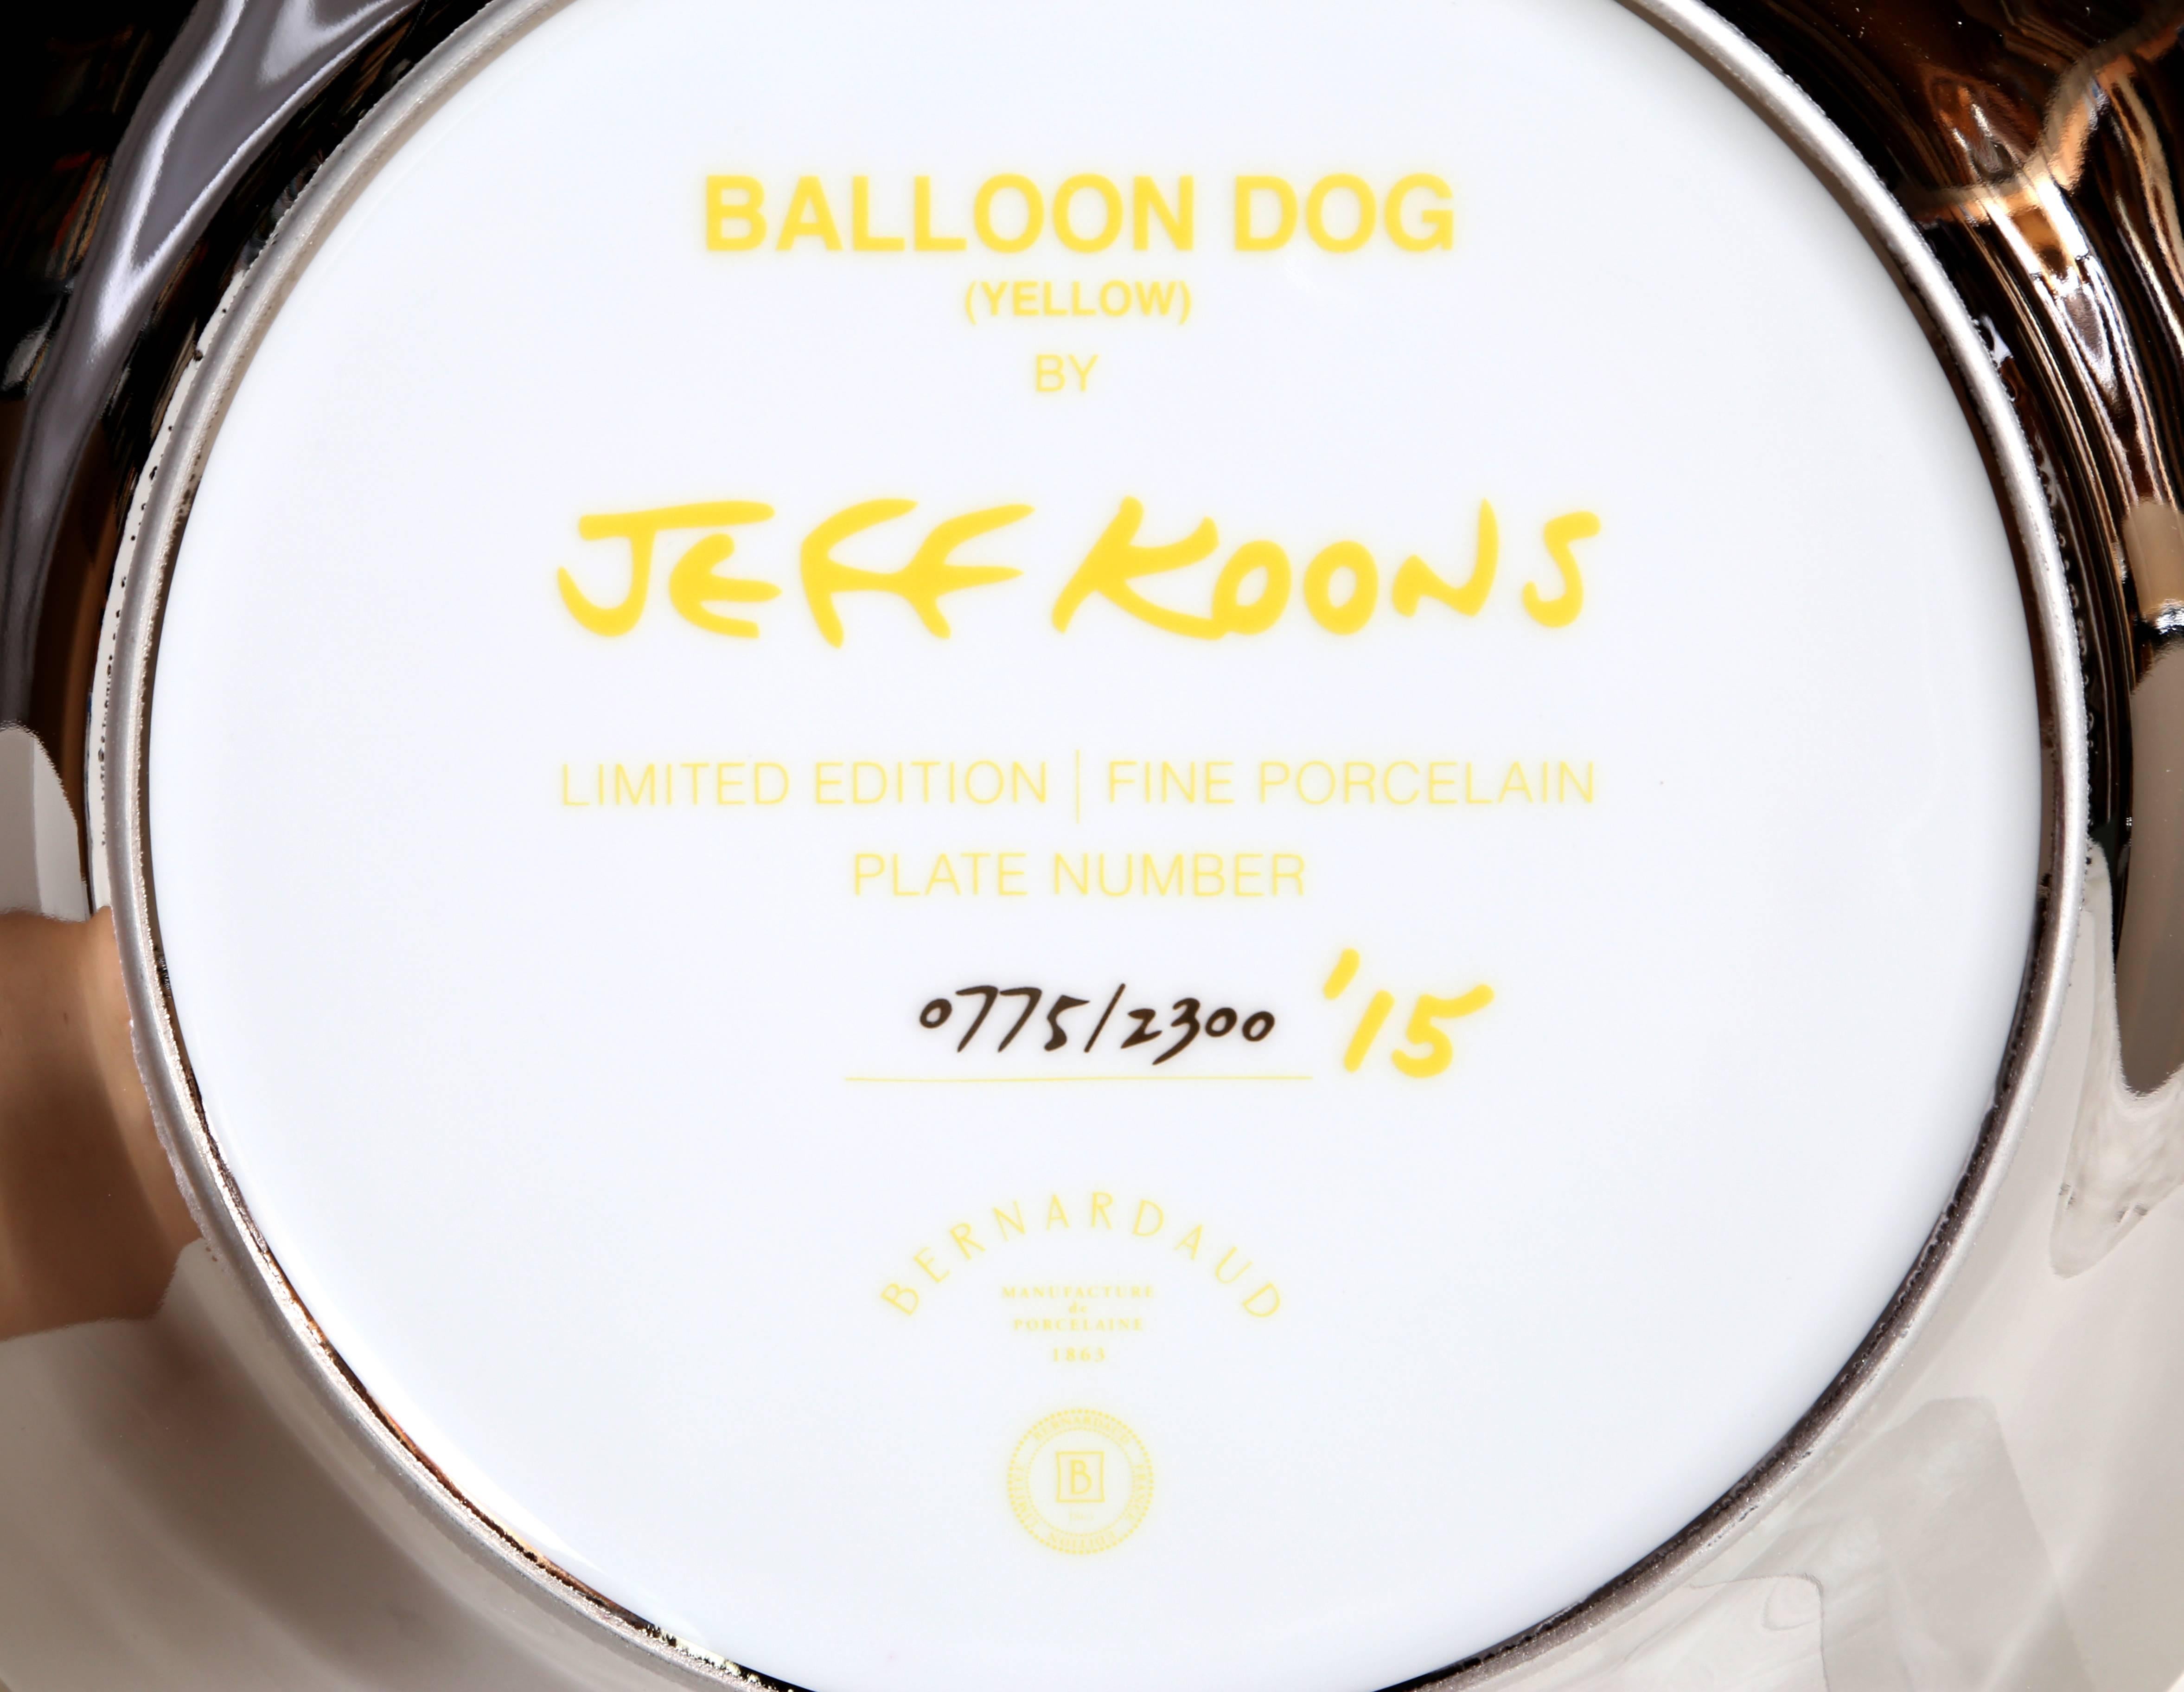 Artist: Jeff Koons, American (1954 - )
Title: Balloon Dog (Yellow)
Year: 2015
Medium: Porcelain with Mirror Finish, signed and numbered verso
Edition: 2300
Size: 10.5 x 10.5 x 5 in. (26.67 x 26.67 x 12.7 cm)
Includes all original packaging.